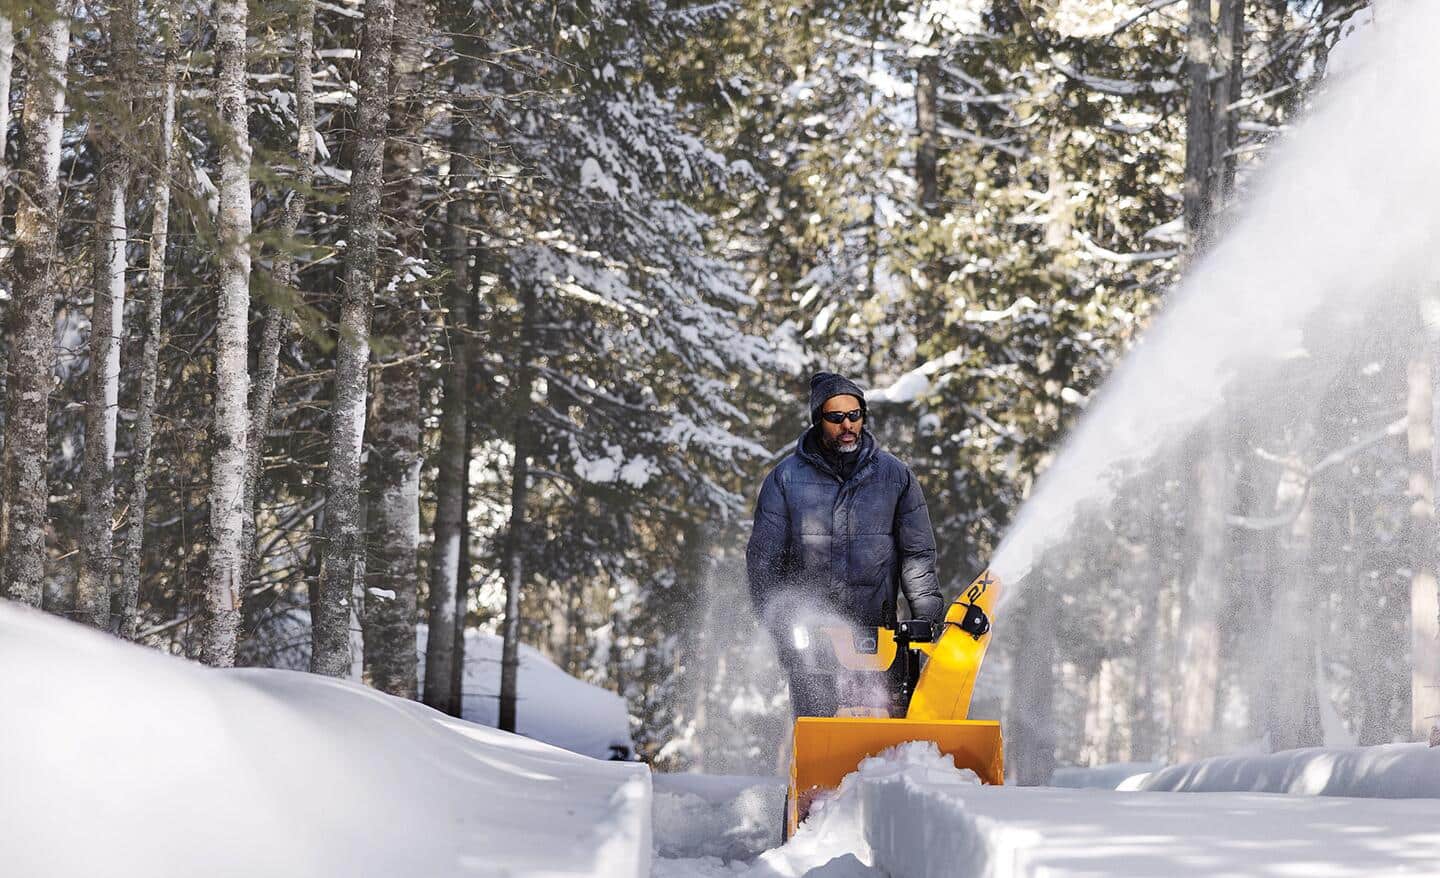 A person pushing a yellow snow blower to clear a path.